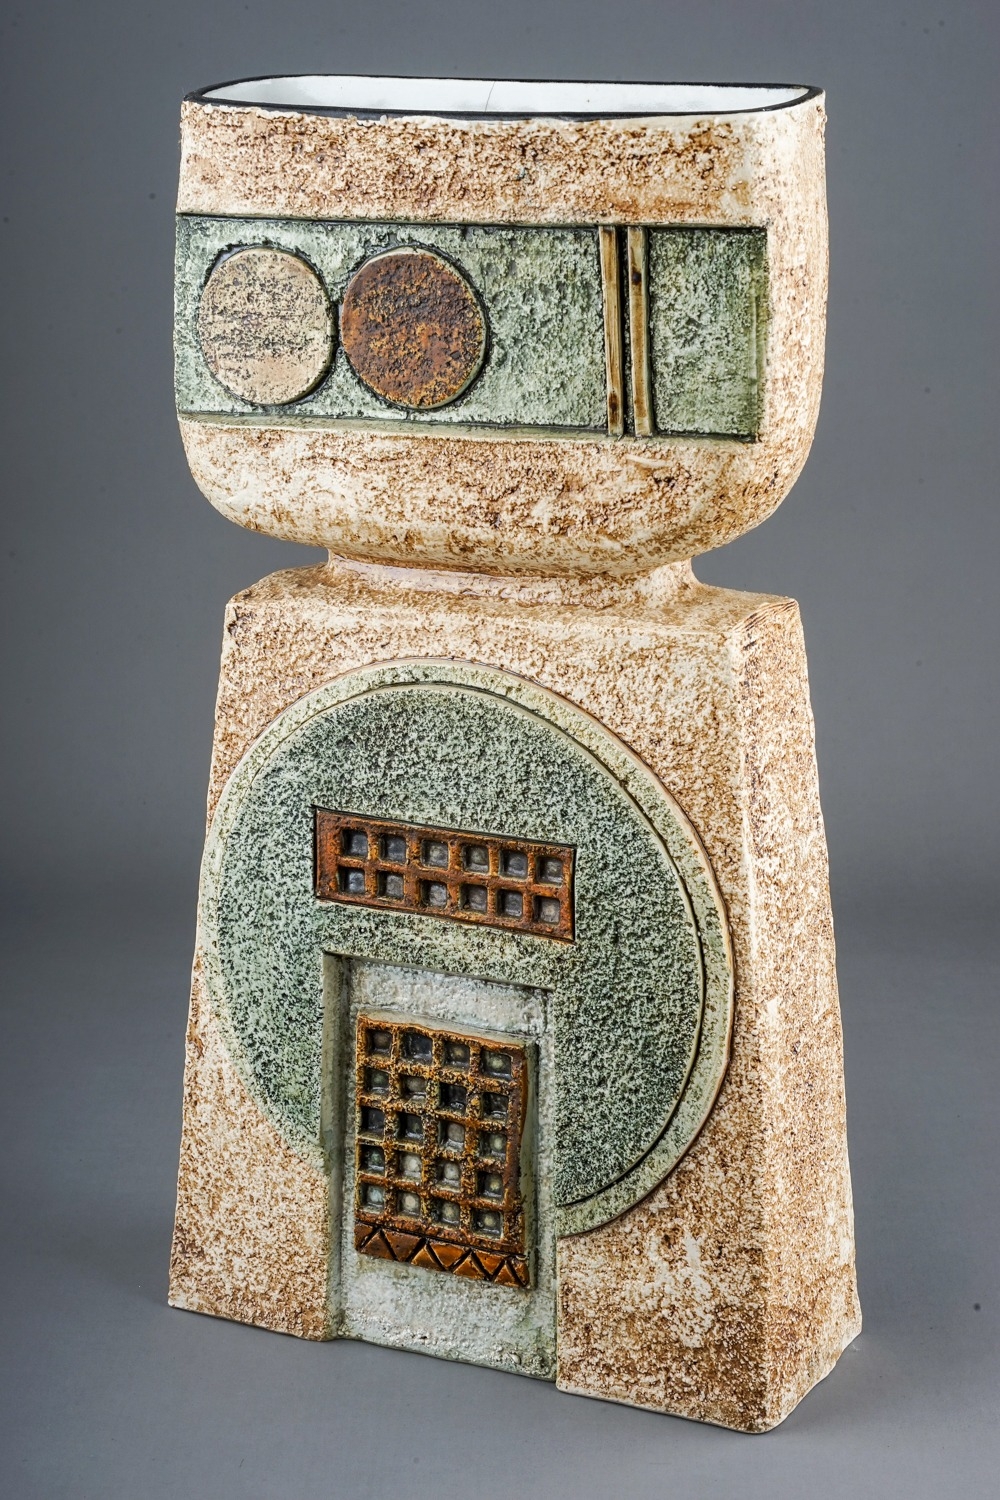 A Troika Pottery double base vase, cast in low relief with geometric panels in shades of ivory and - Image 4 of 8